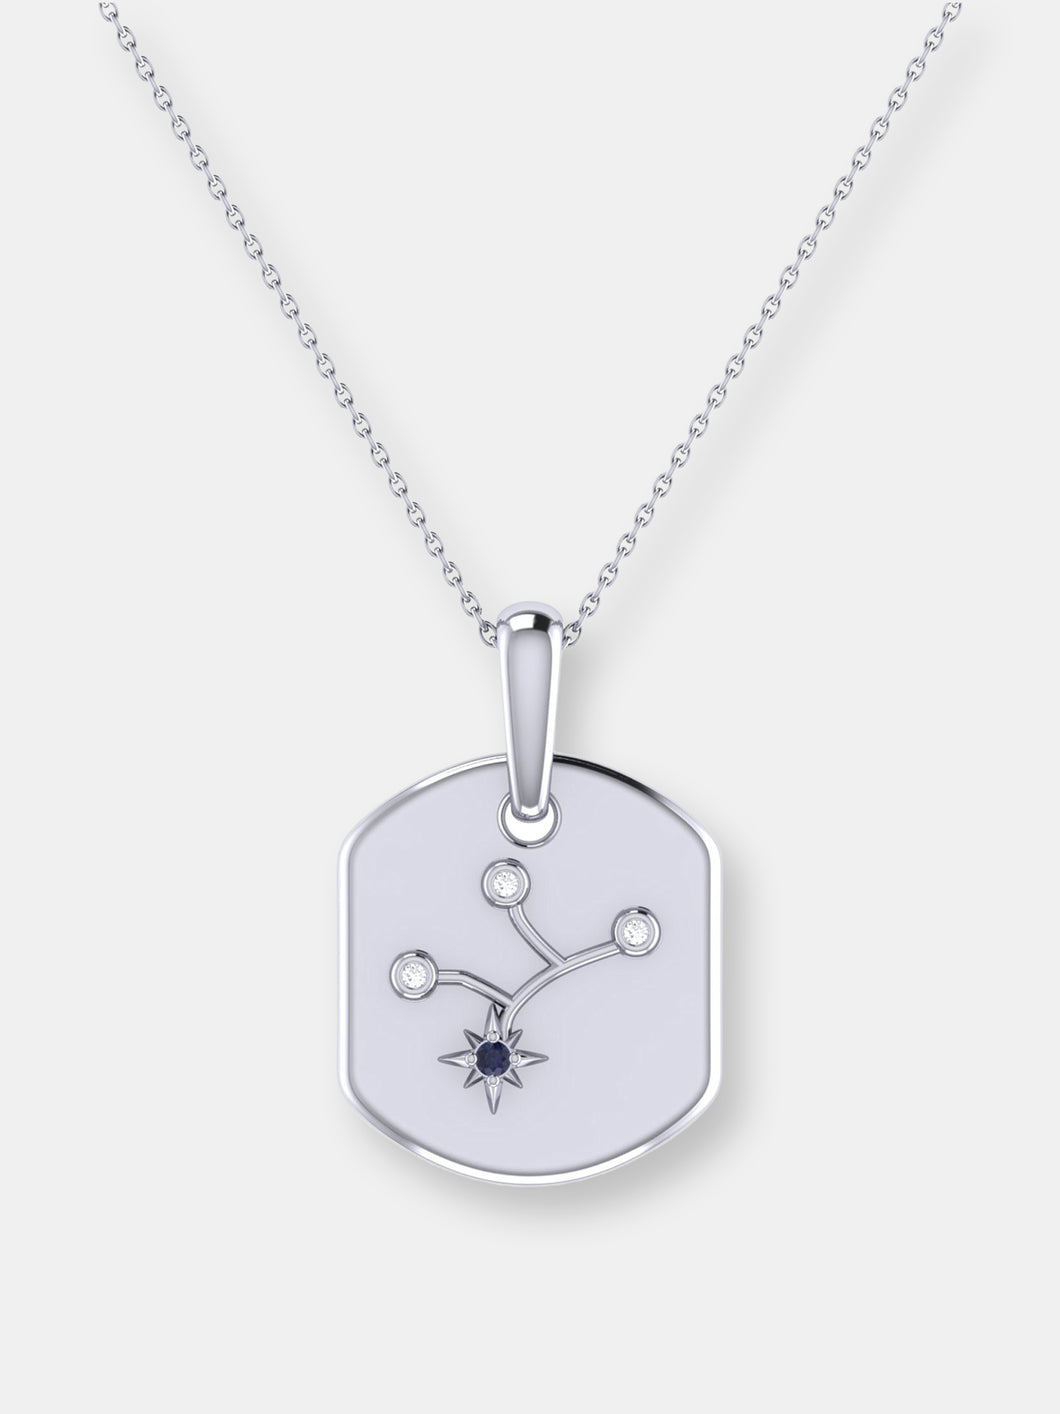 Virgo Maiden Blue Sapphire & Diamond Constellation Tag Pendant Necklace in Sterling Silver